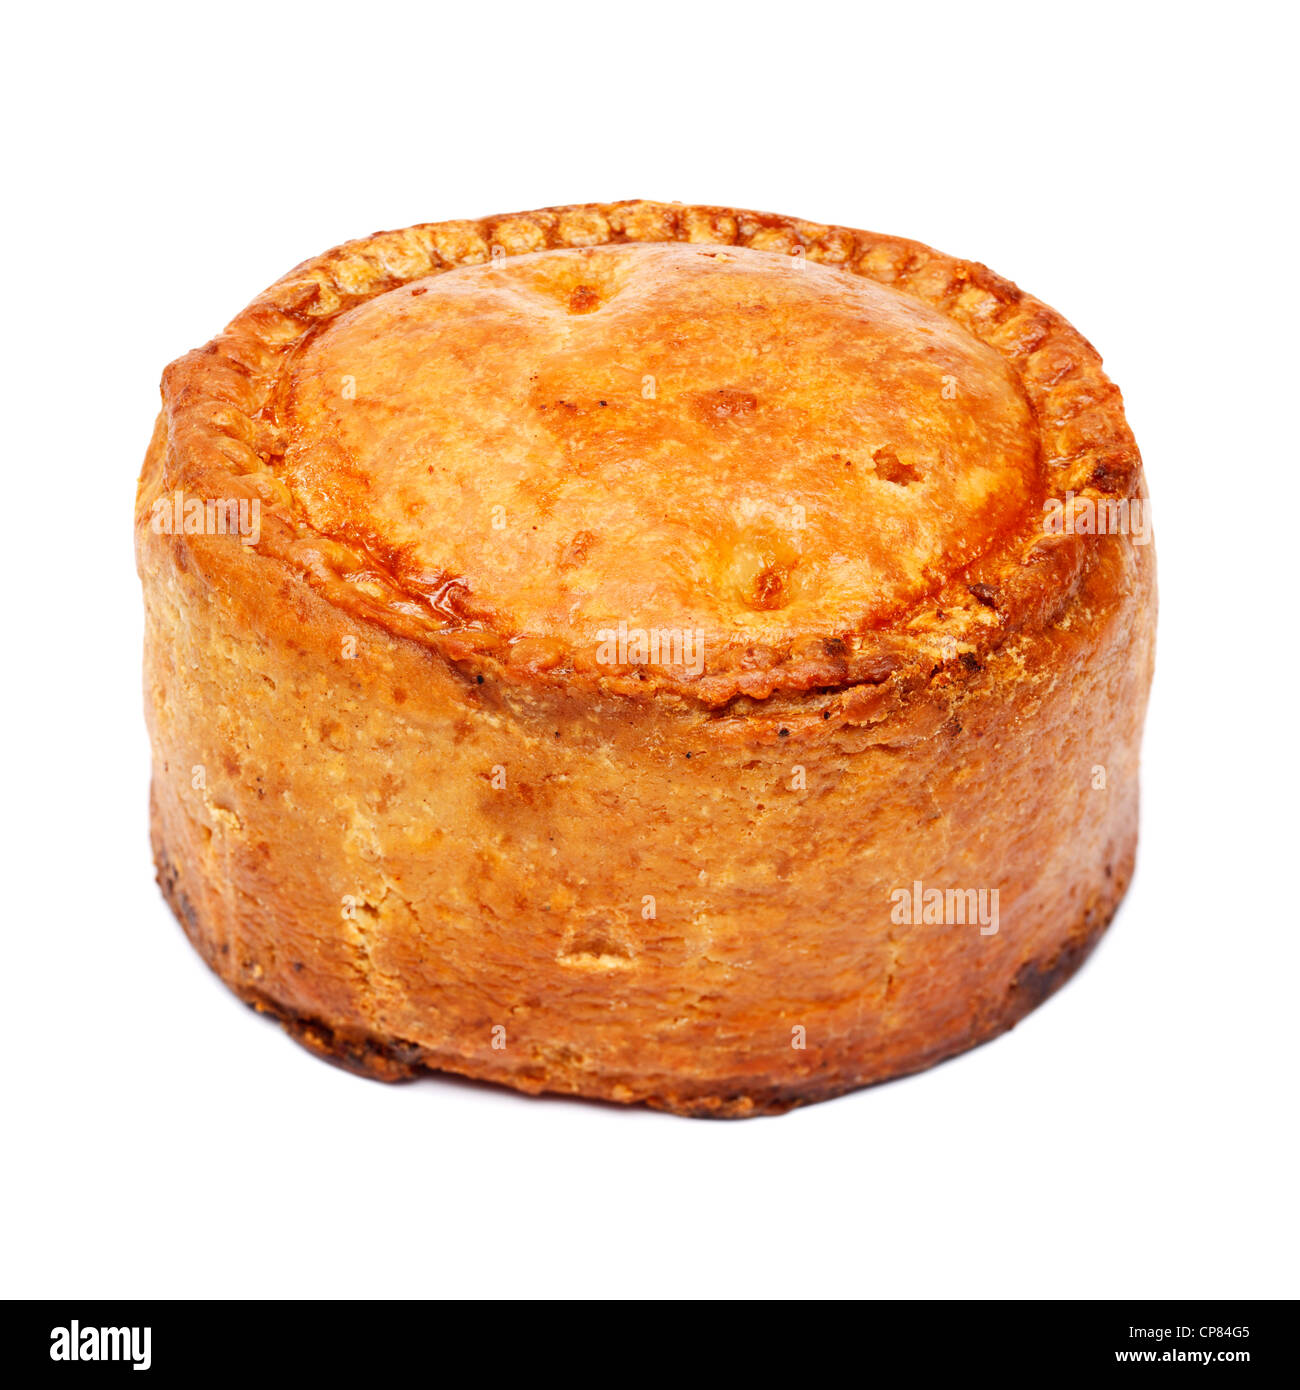 Pork pie - cut out on white background Stock Photo